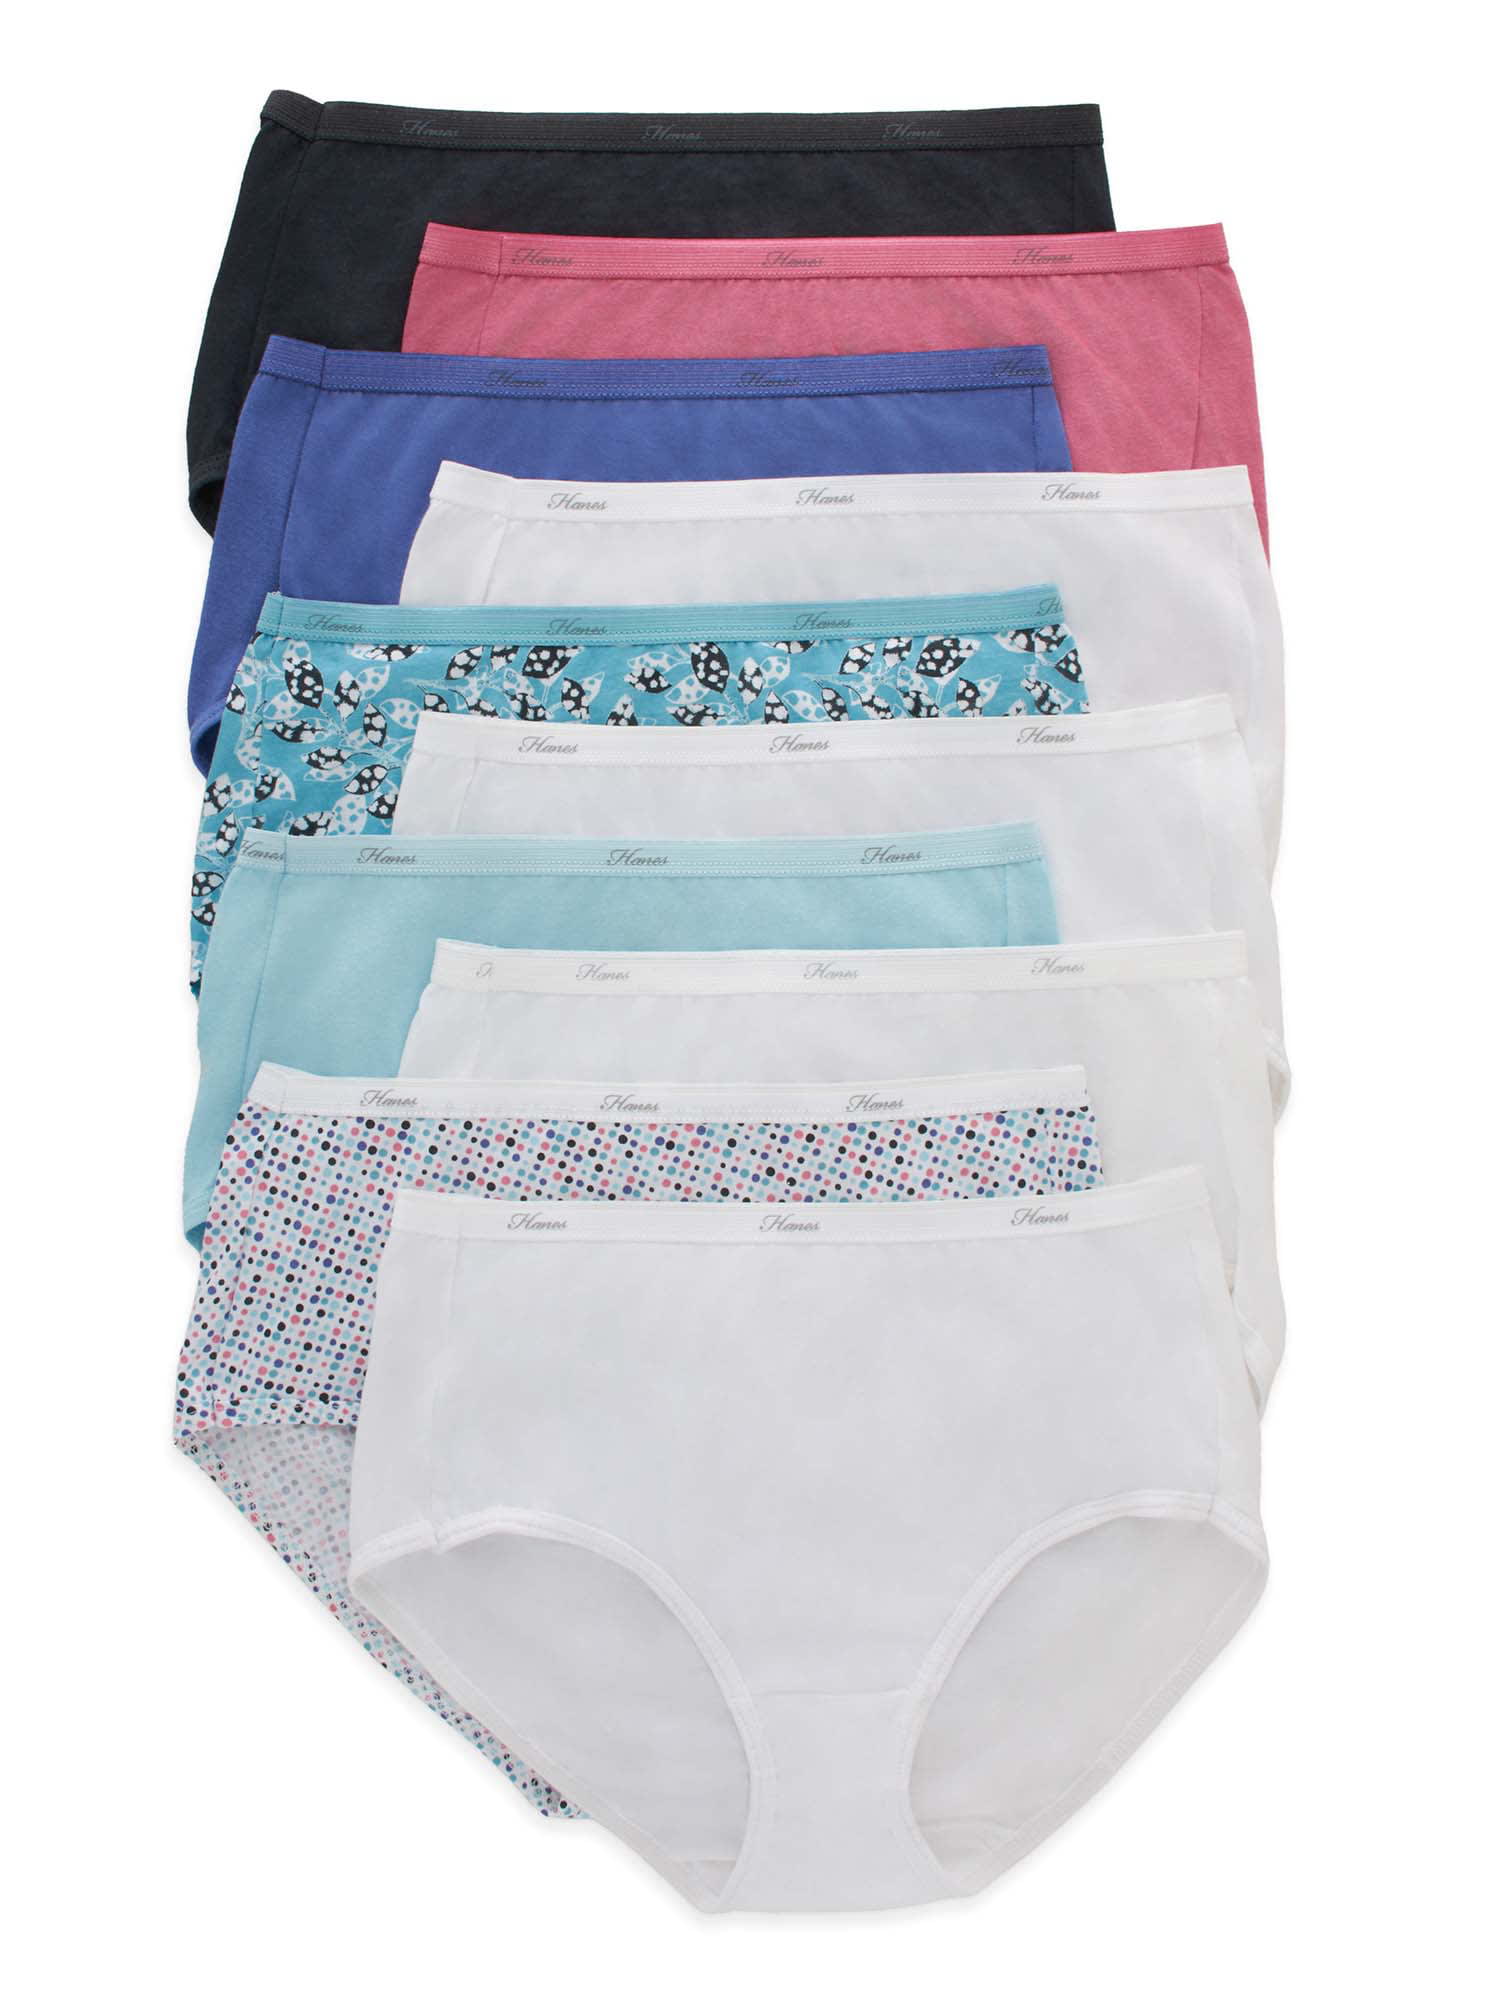 Hanes Toddler Boy Potty Trainer Brief Underwear, 6 Pack, Sizes 2T-4T -  DroneUp Delivery